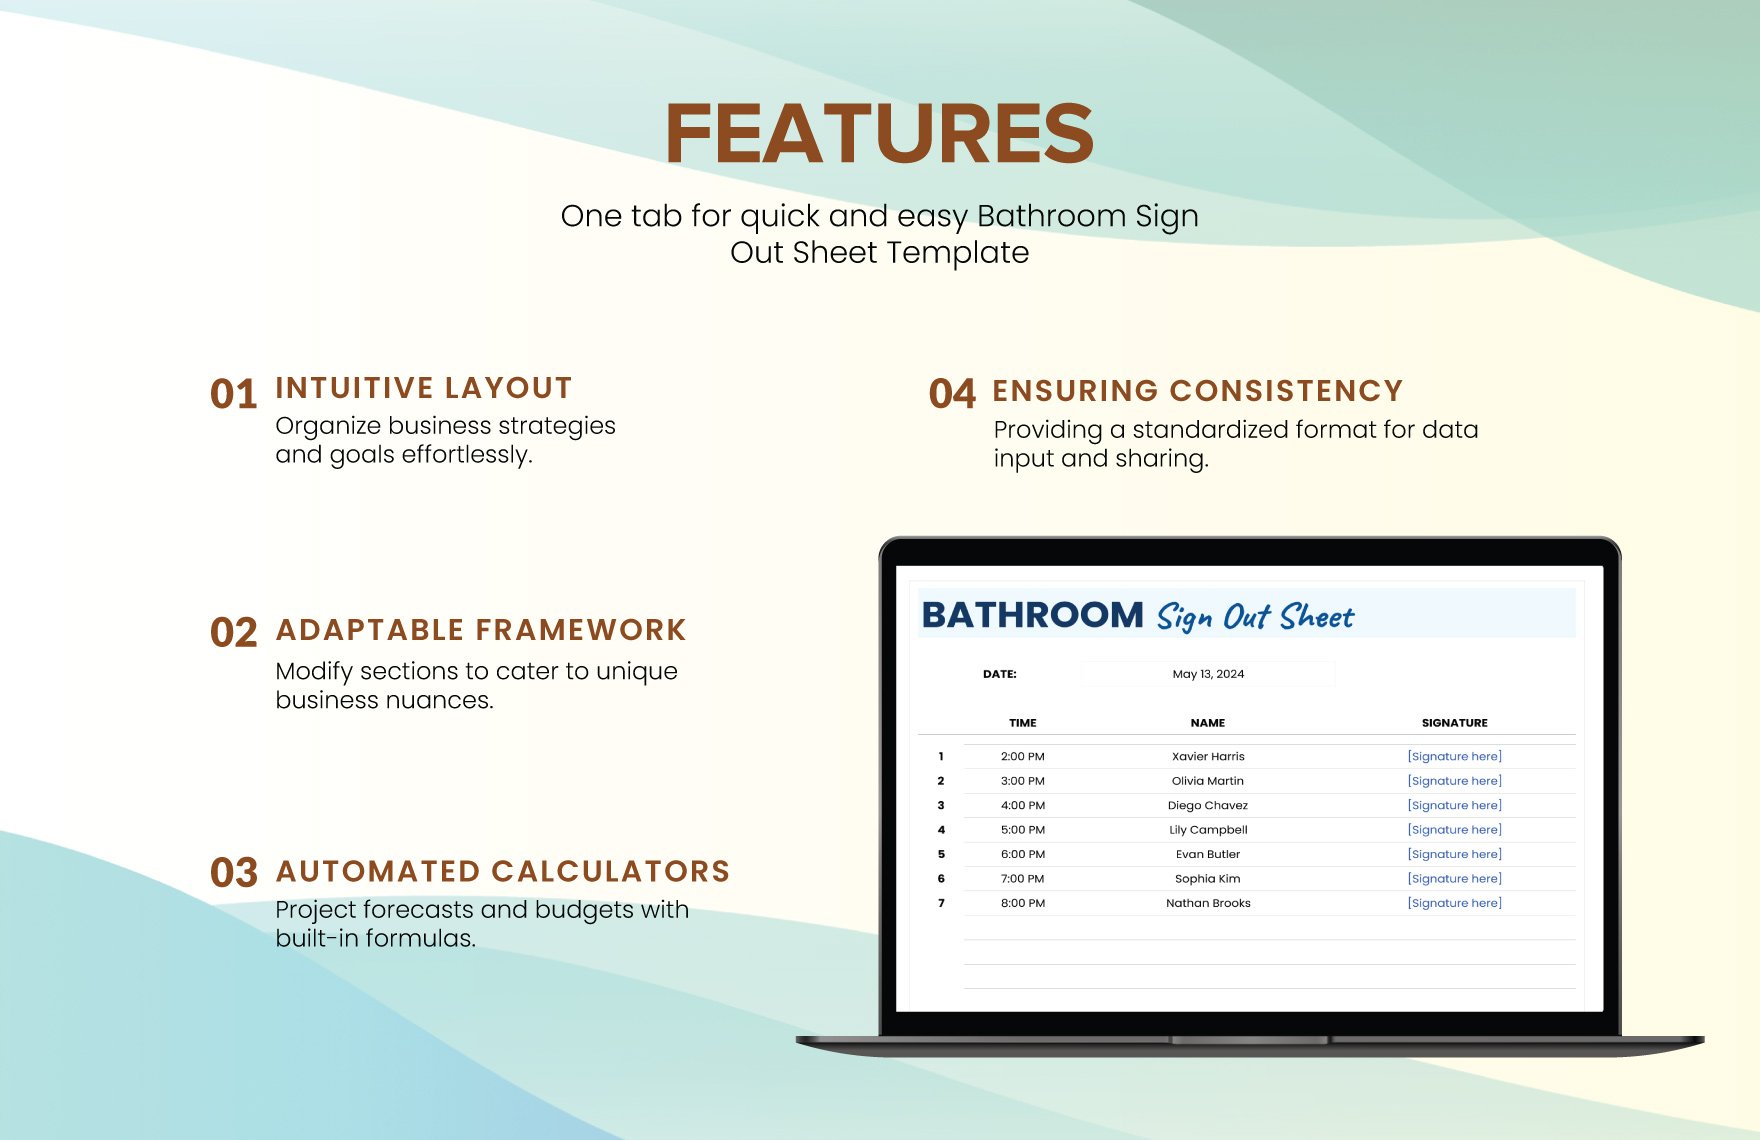 Bathroom Sign Out Sheet Template